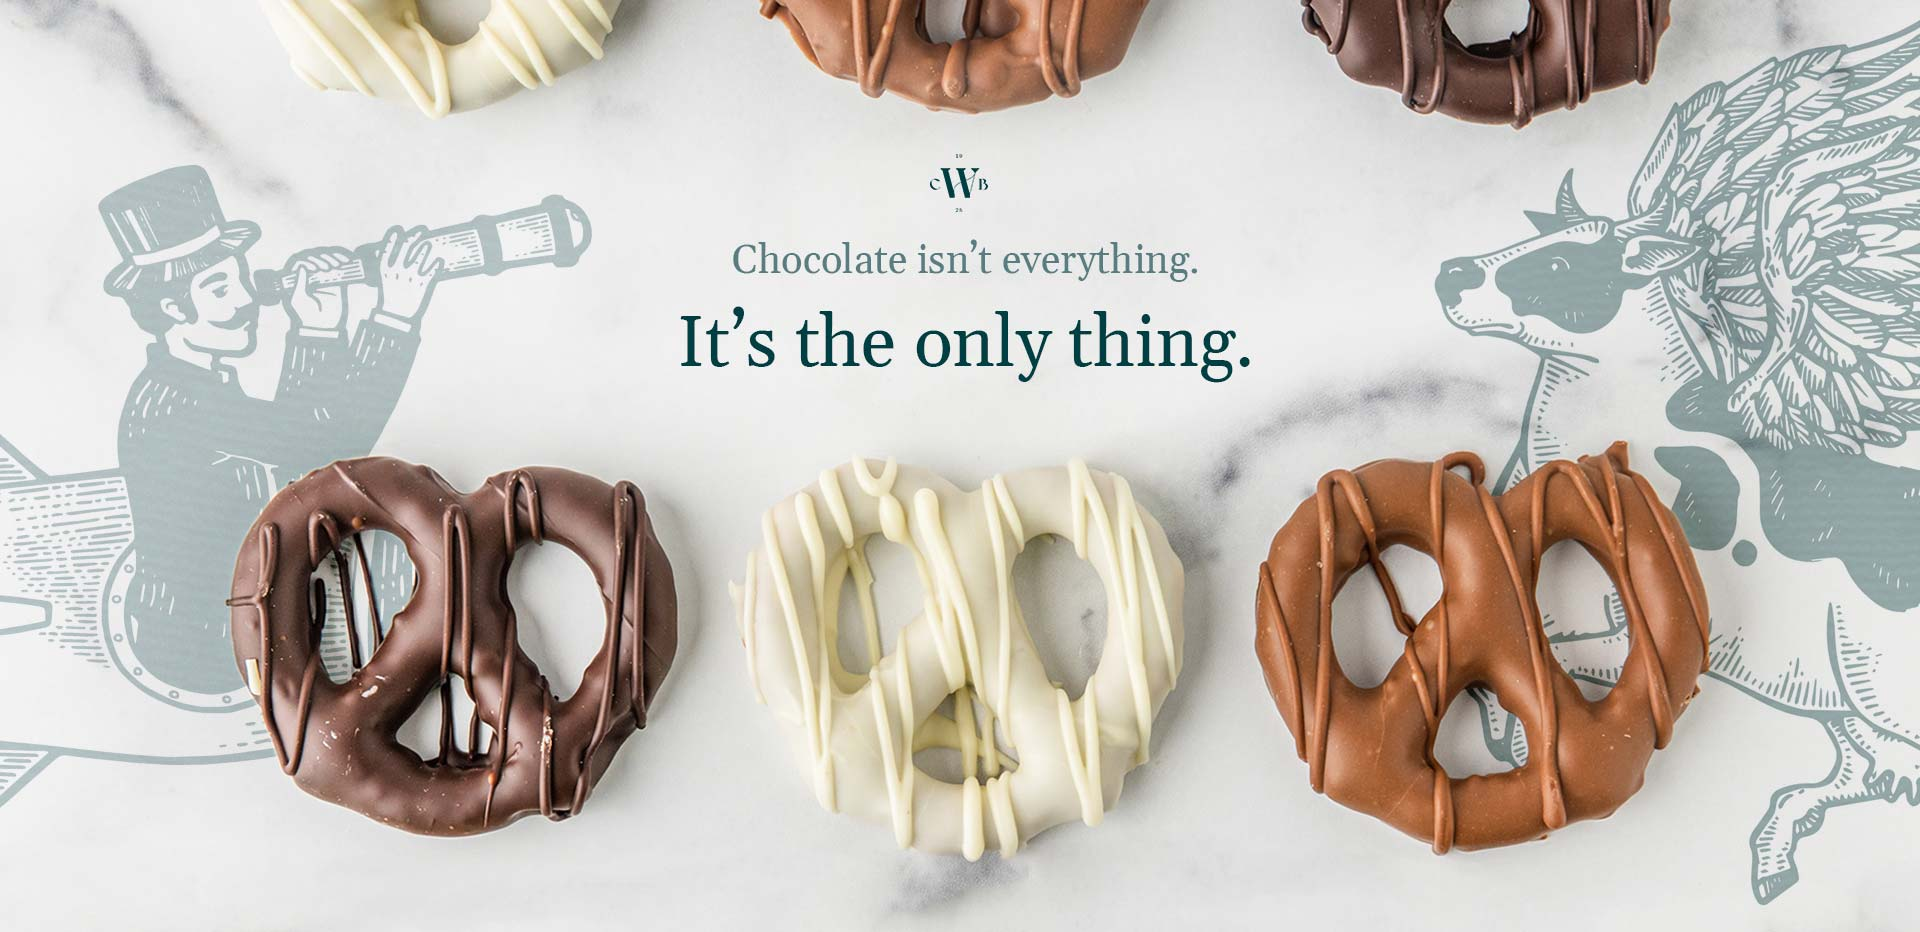 Chocolate isn't everything. It's the only thing.